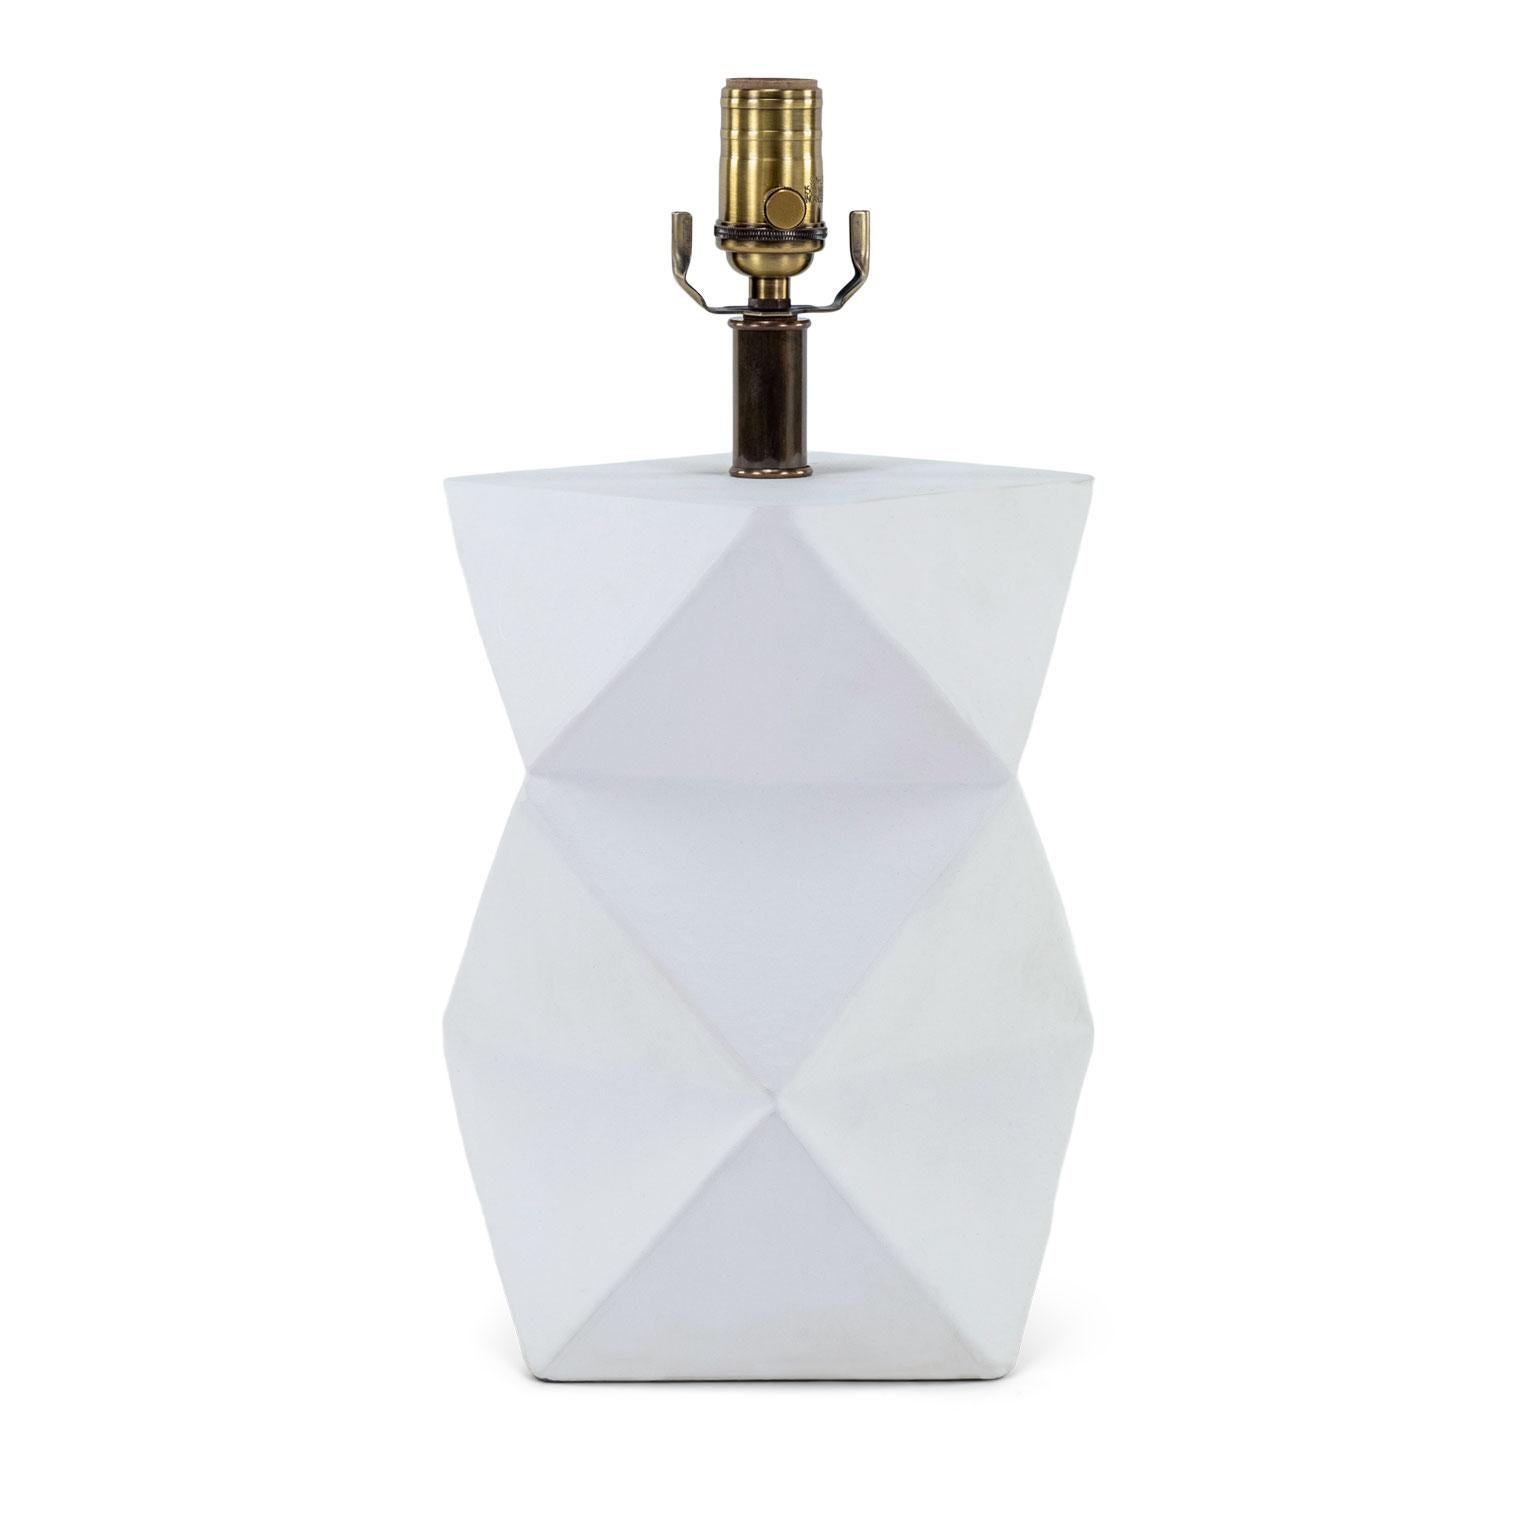 'Origami' white plaster lamp, by Liz Marsh. Geometric abstract shaped table lamp artist-sculpted to resemble Japanese origami. Wired for use within the USA using UL approved parts. Accommodates medium-size dimmer bulb. Includes complimentary black